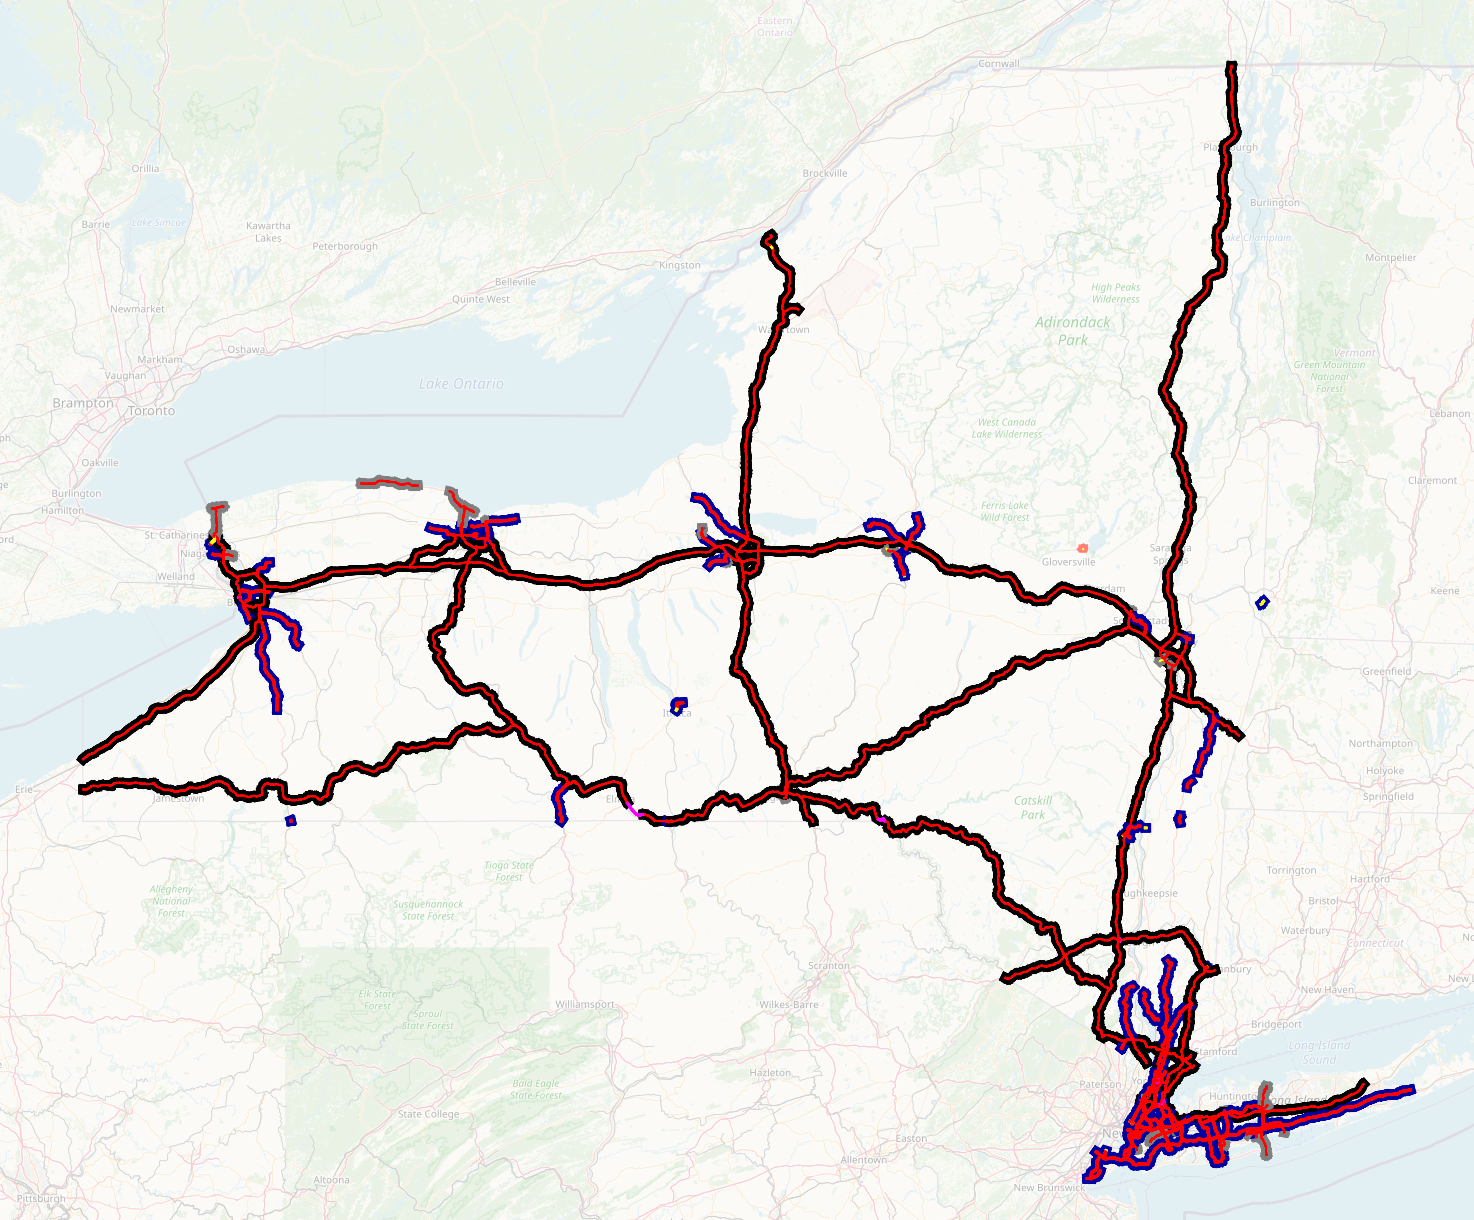 Limited-access highways in NY State